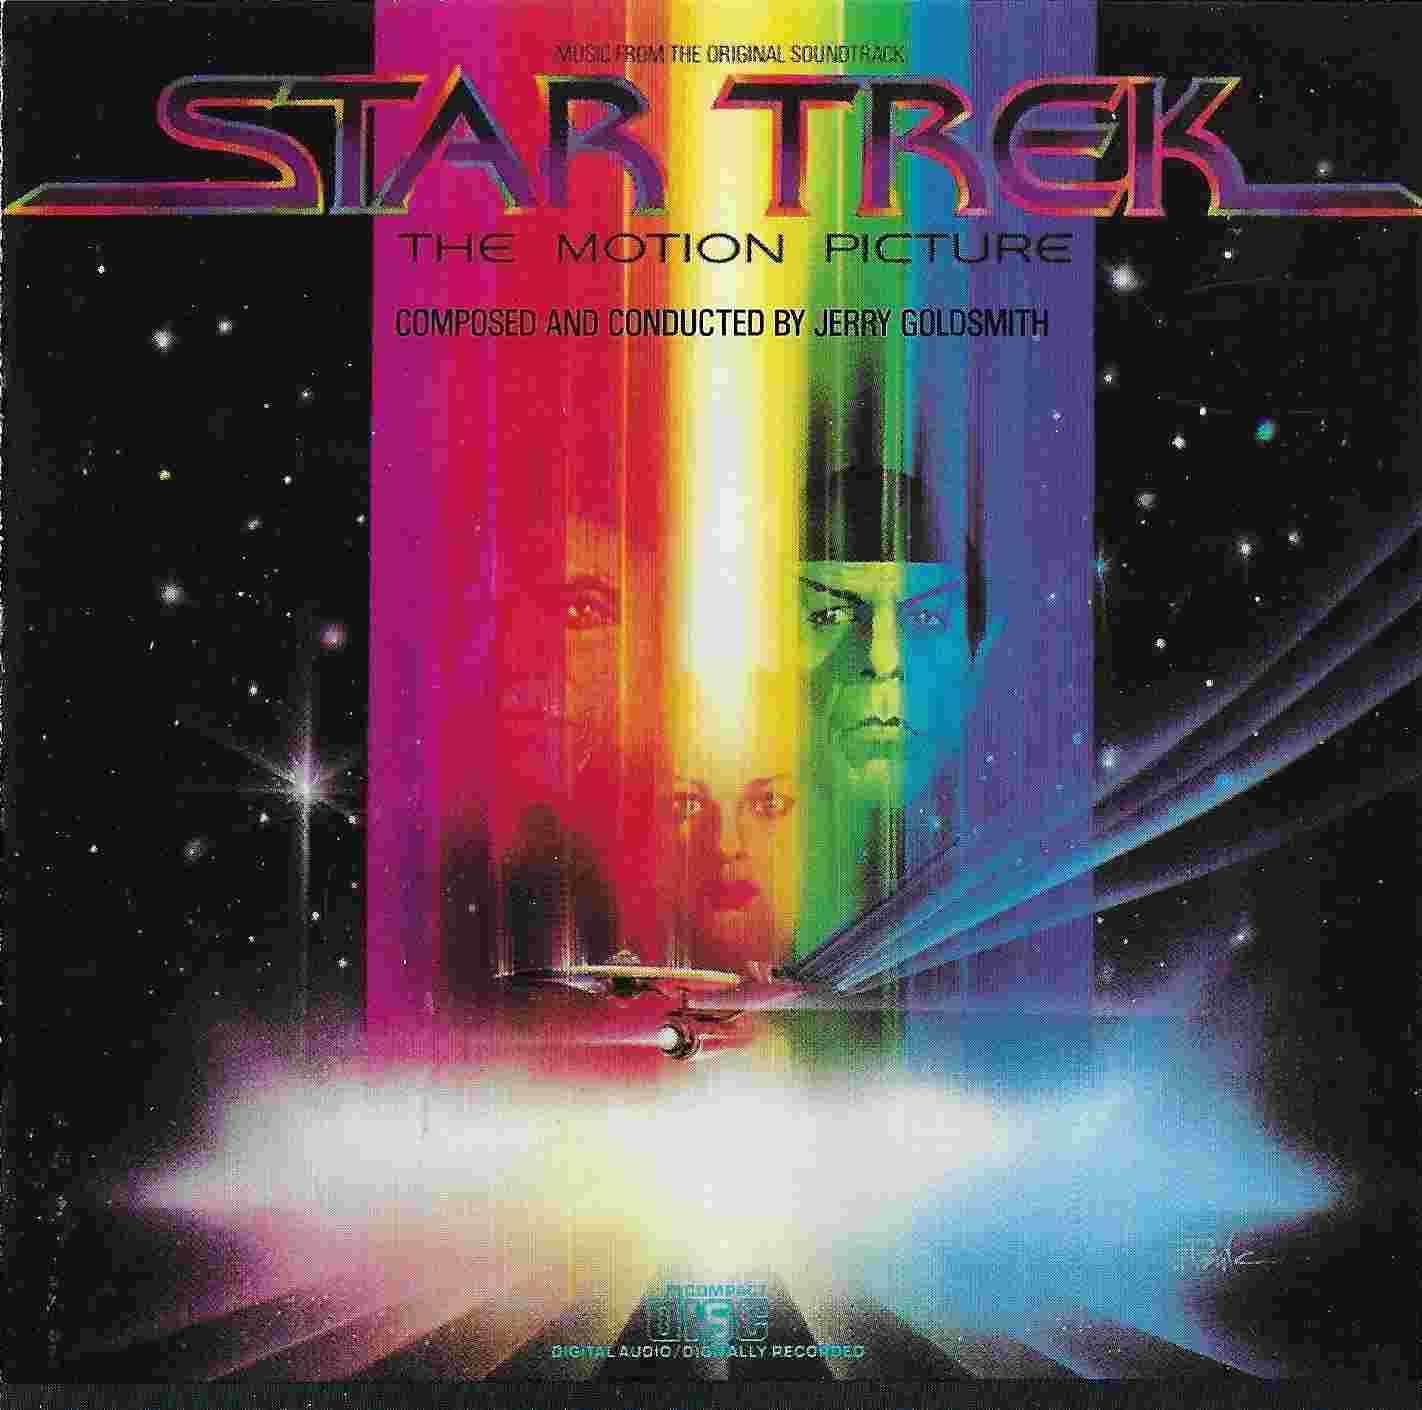 Picture of CK 36334 Star trek - The motion picture (US import) by artist Alexander Courrage / Jerry Goldsmith from the BBC cds - Records and Tapes library